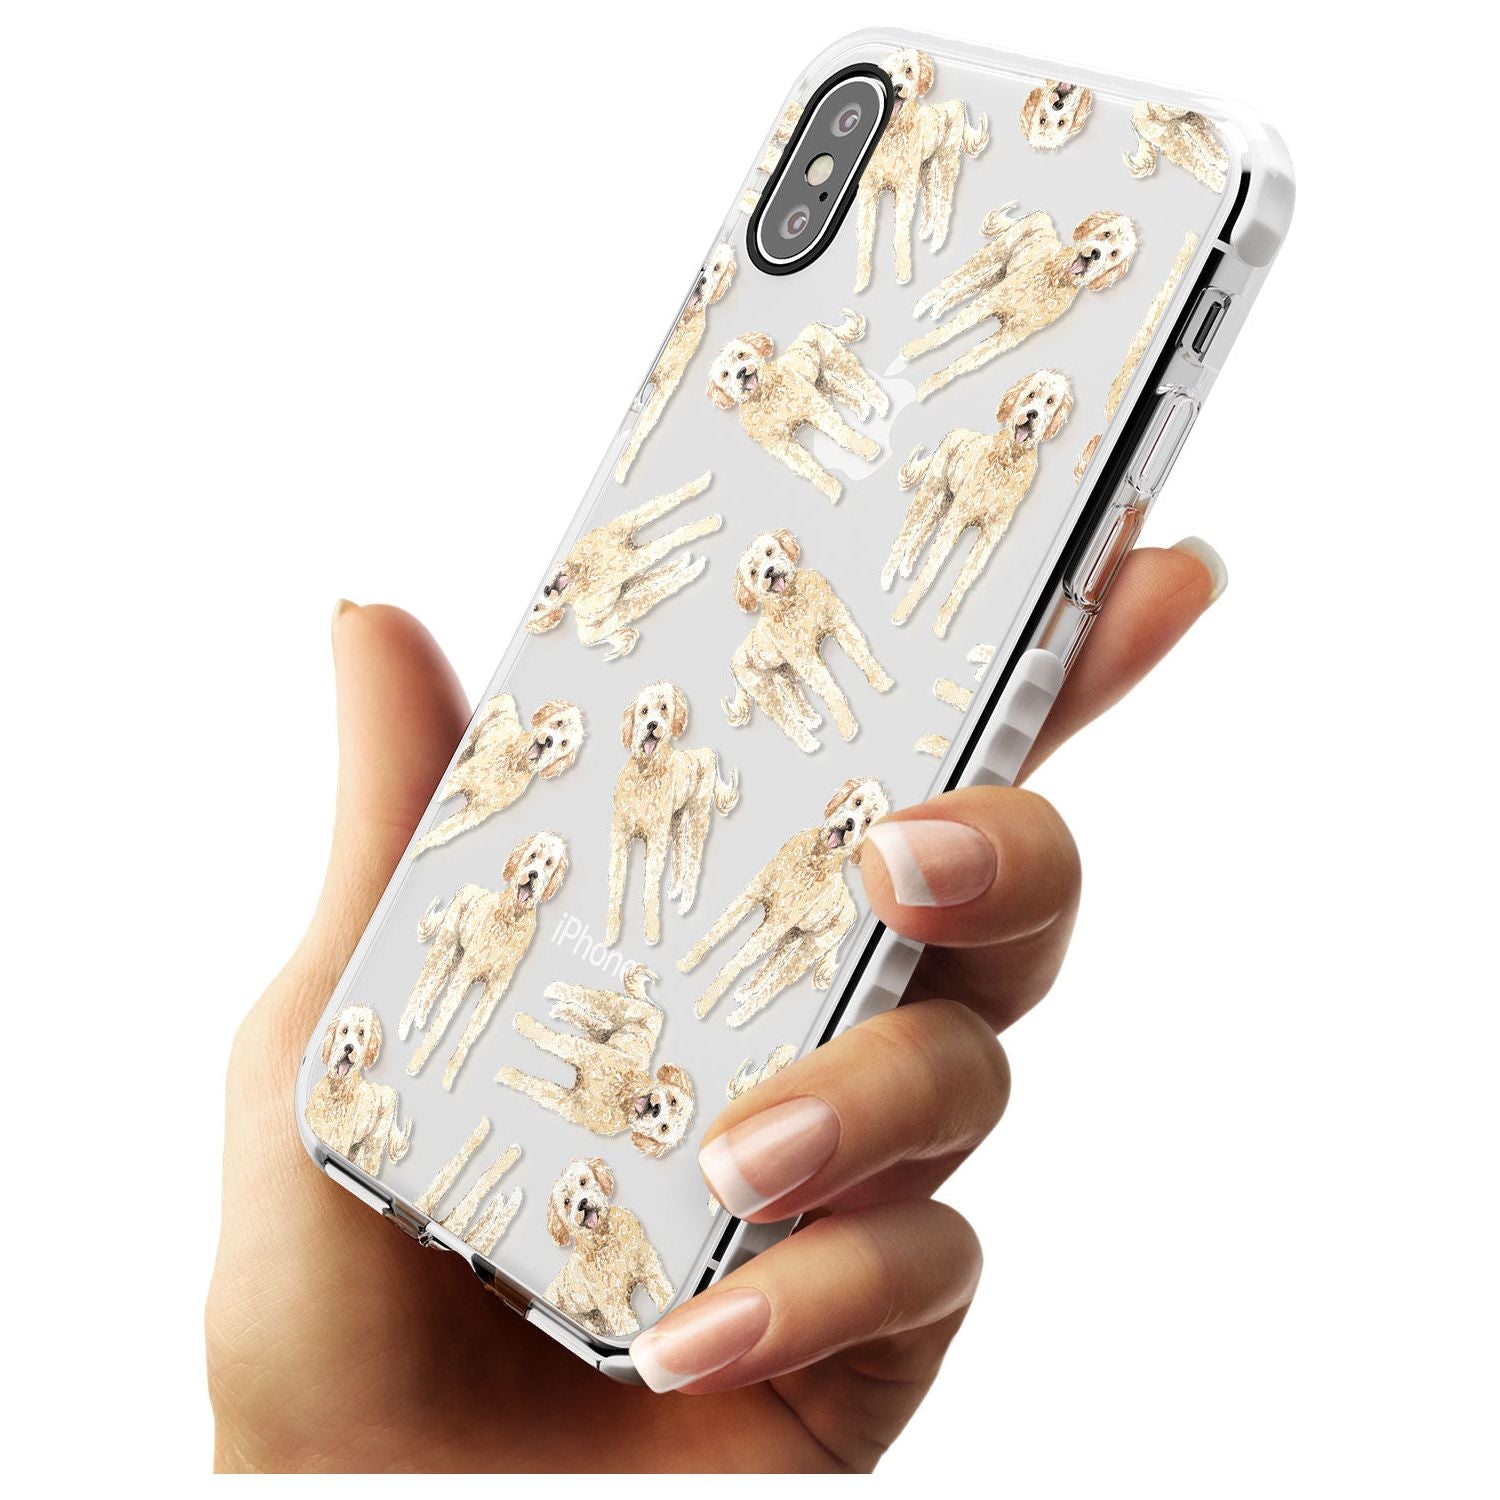 Goldendoodle Watercolour Dog Pattern Impact Phone Case for iPhone X XS Max XR